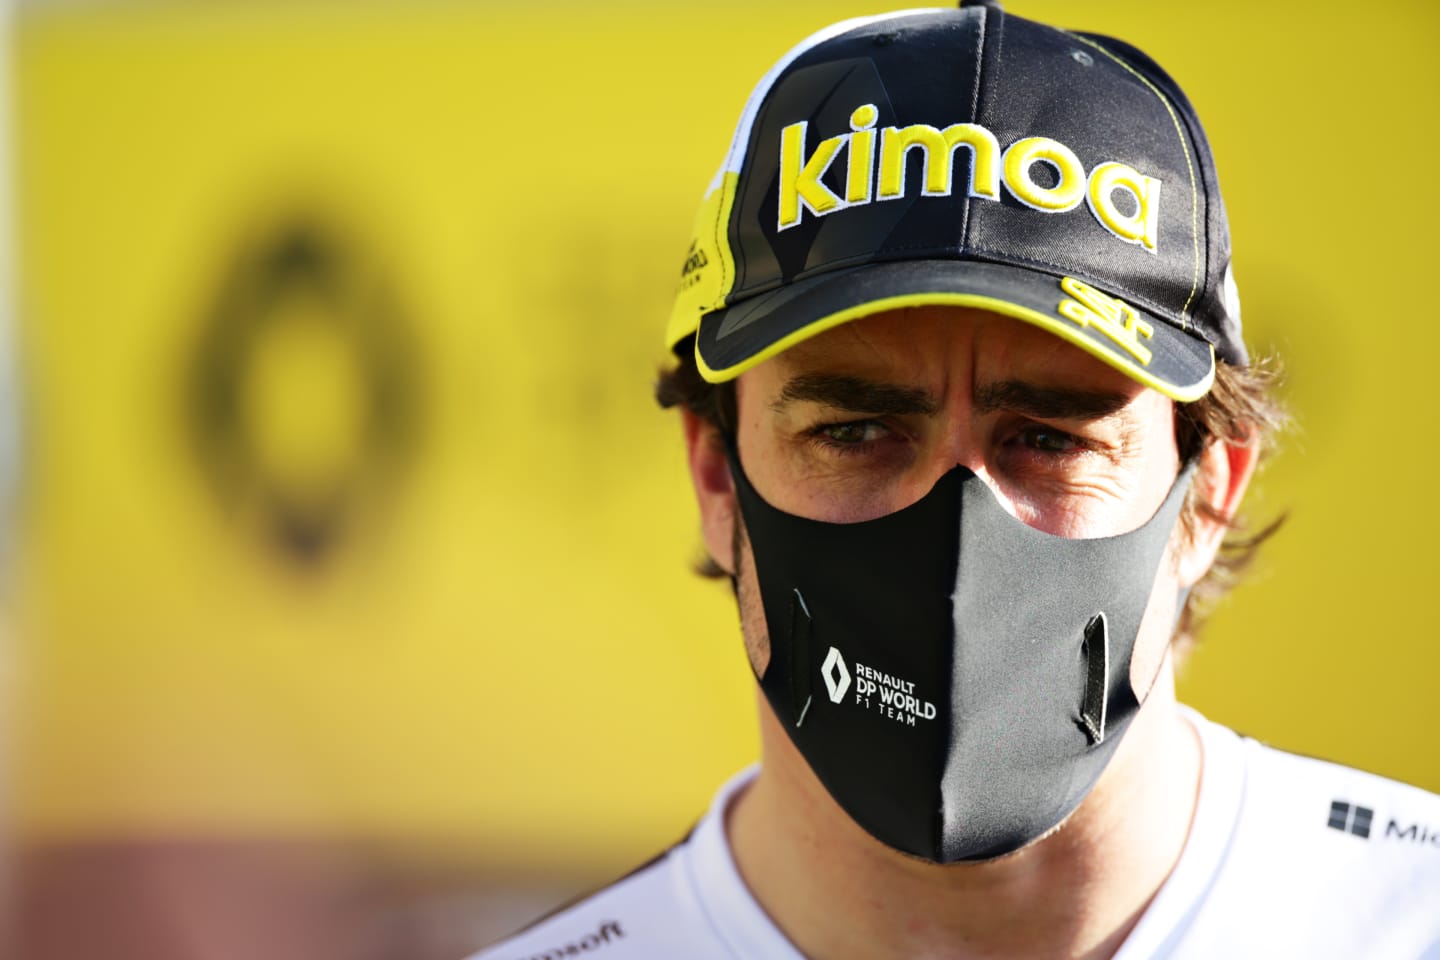 BAHRAIN, BAHRAIN - DECEMBER 04: Fernando Alonso of Spain and Renault Sport F1 talks to the media in